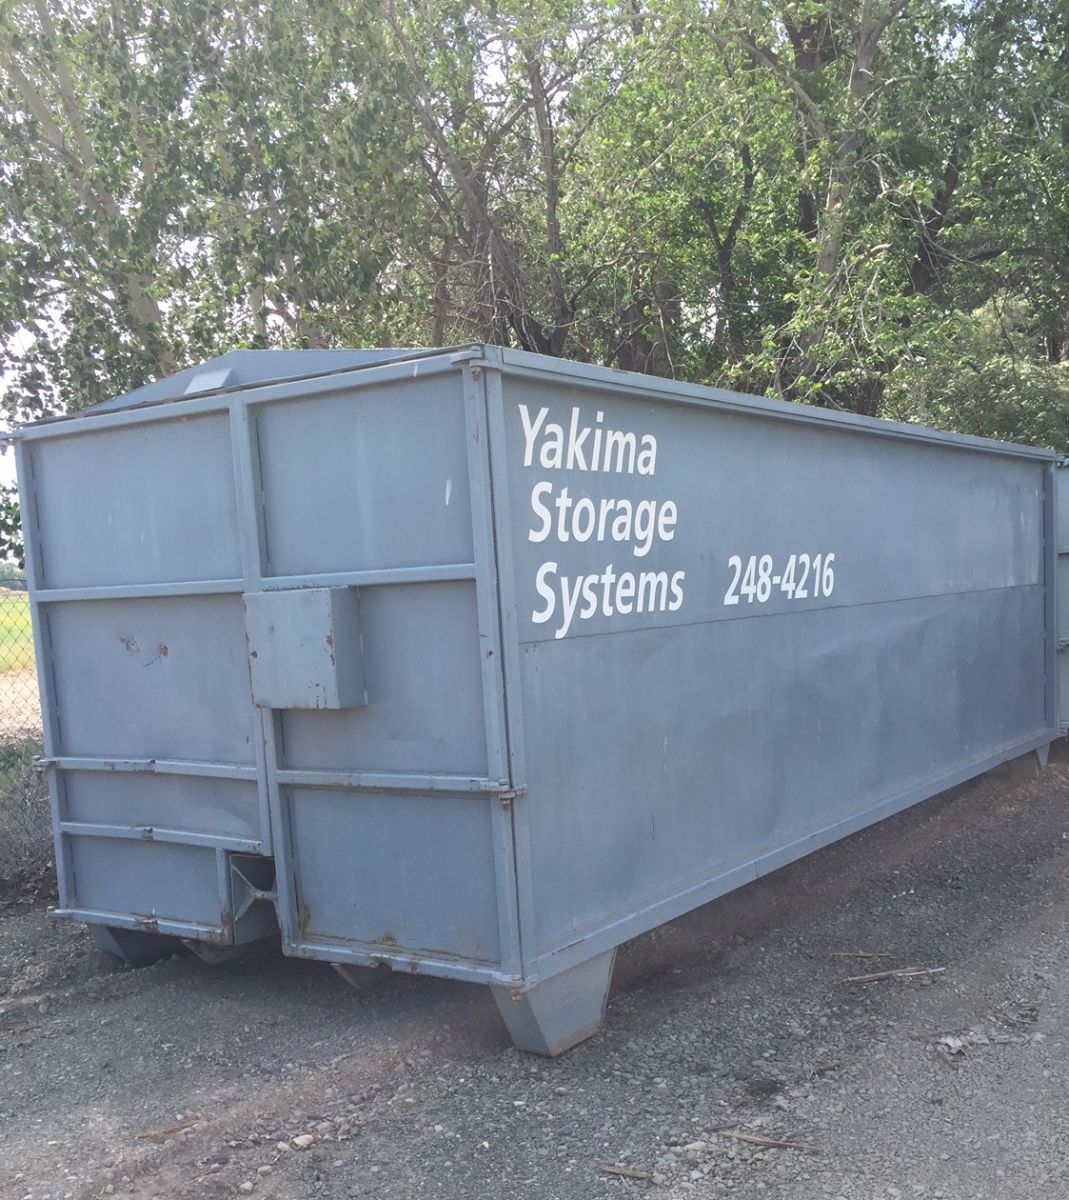 Yakima Waste Systems storage container.